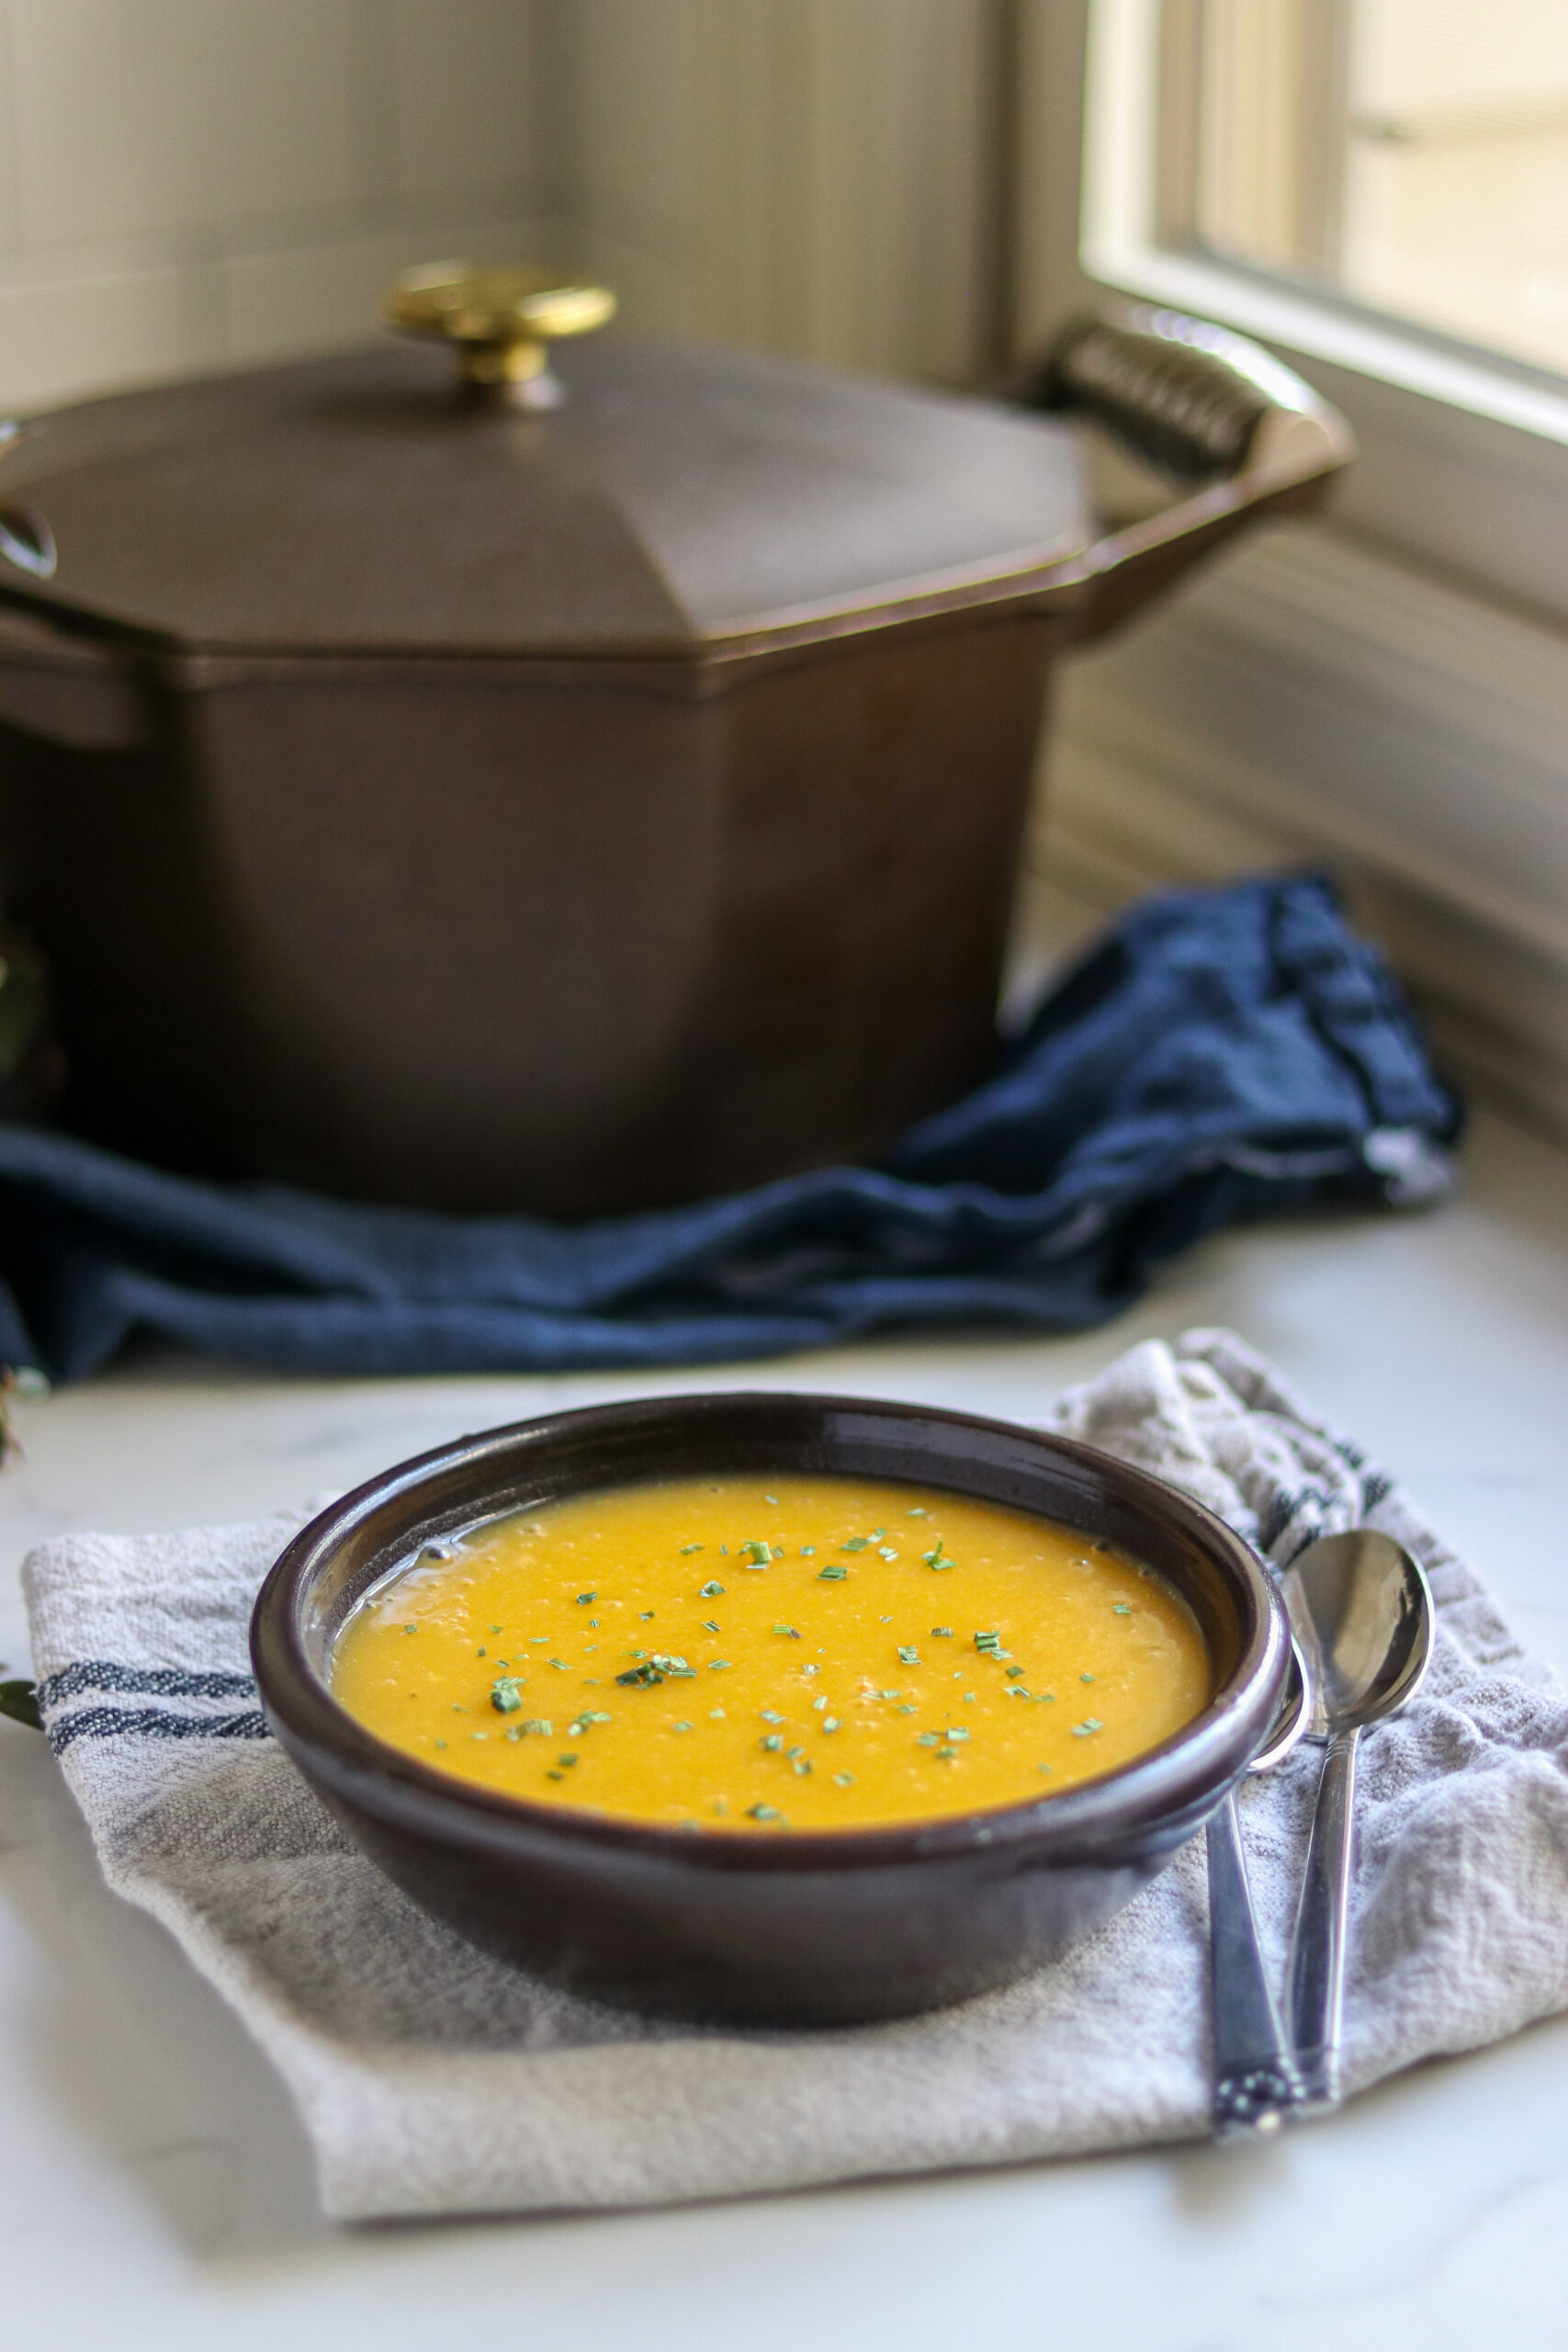 Serving Home Canned Butternut Squash Soup